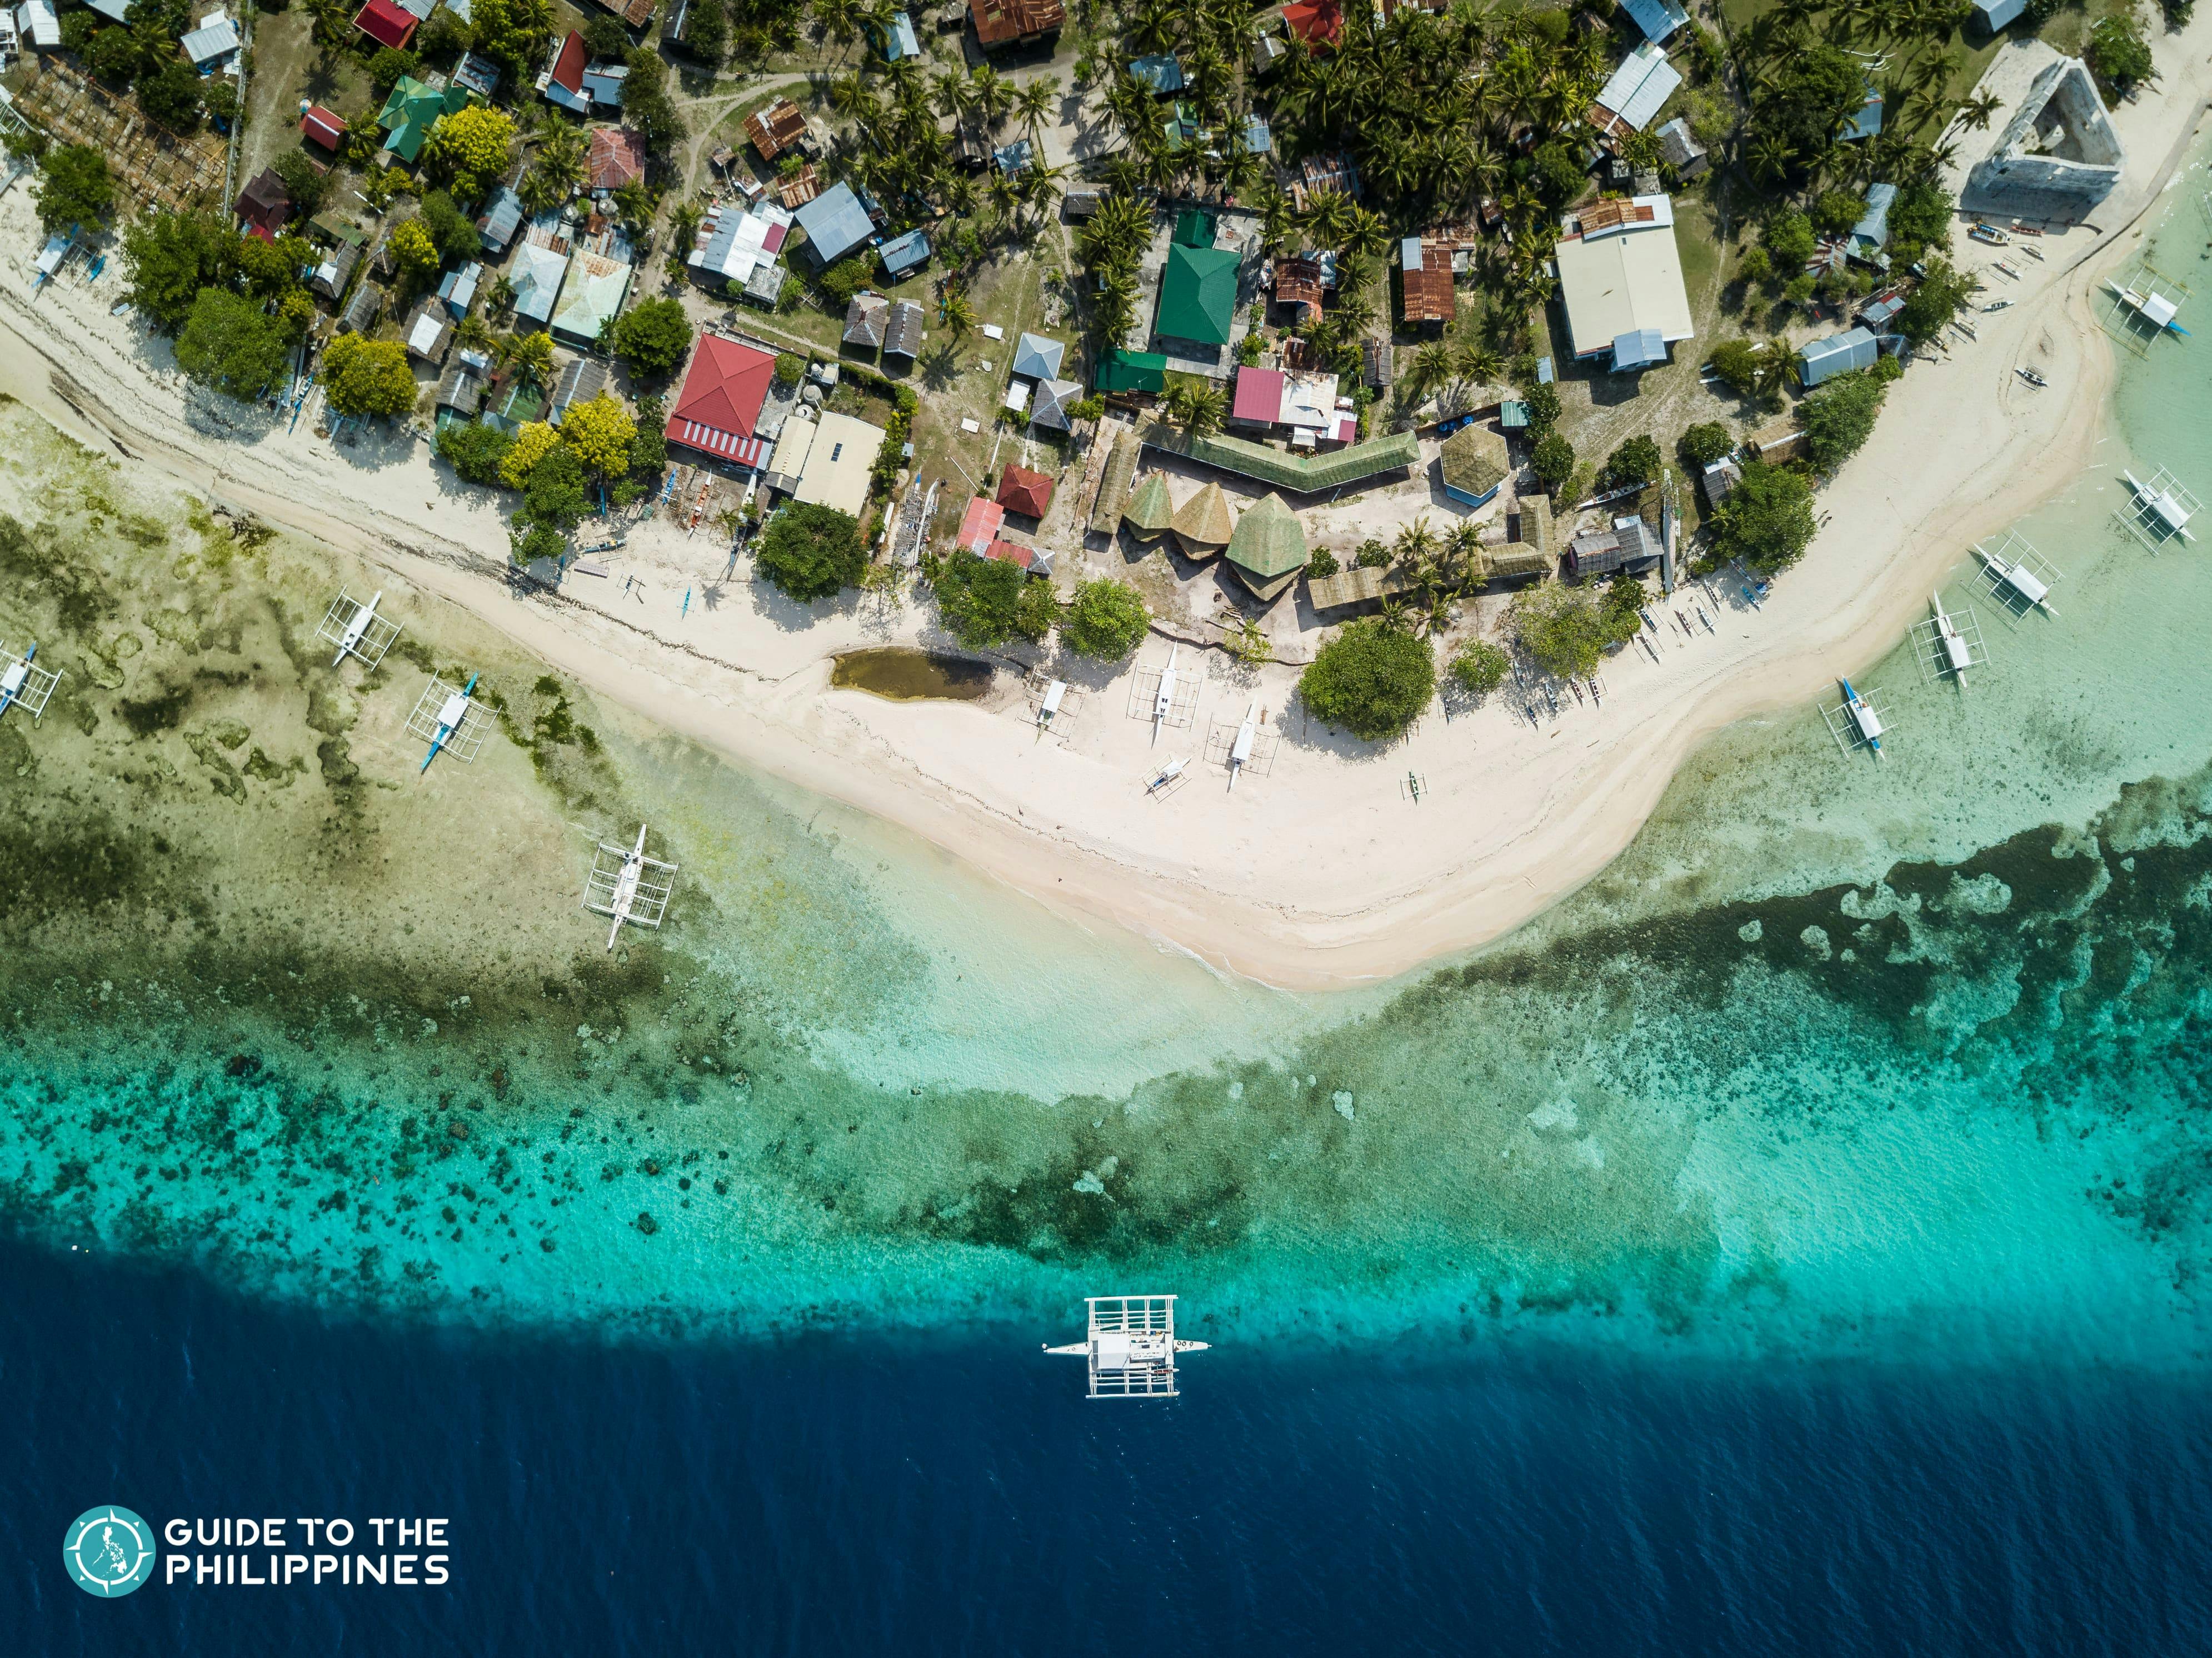 Deep blue waters and white sand at Pamilacan Island in Bohol